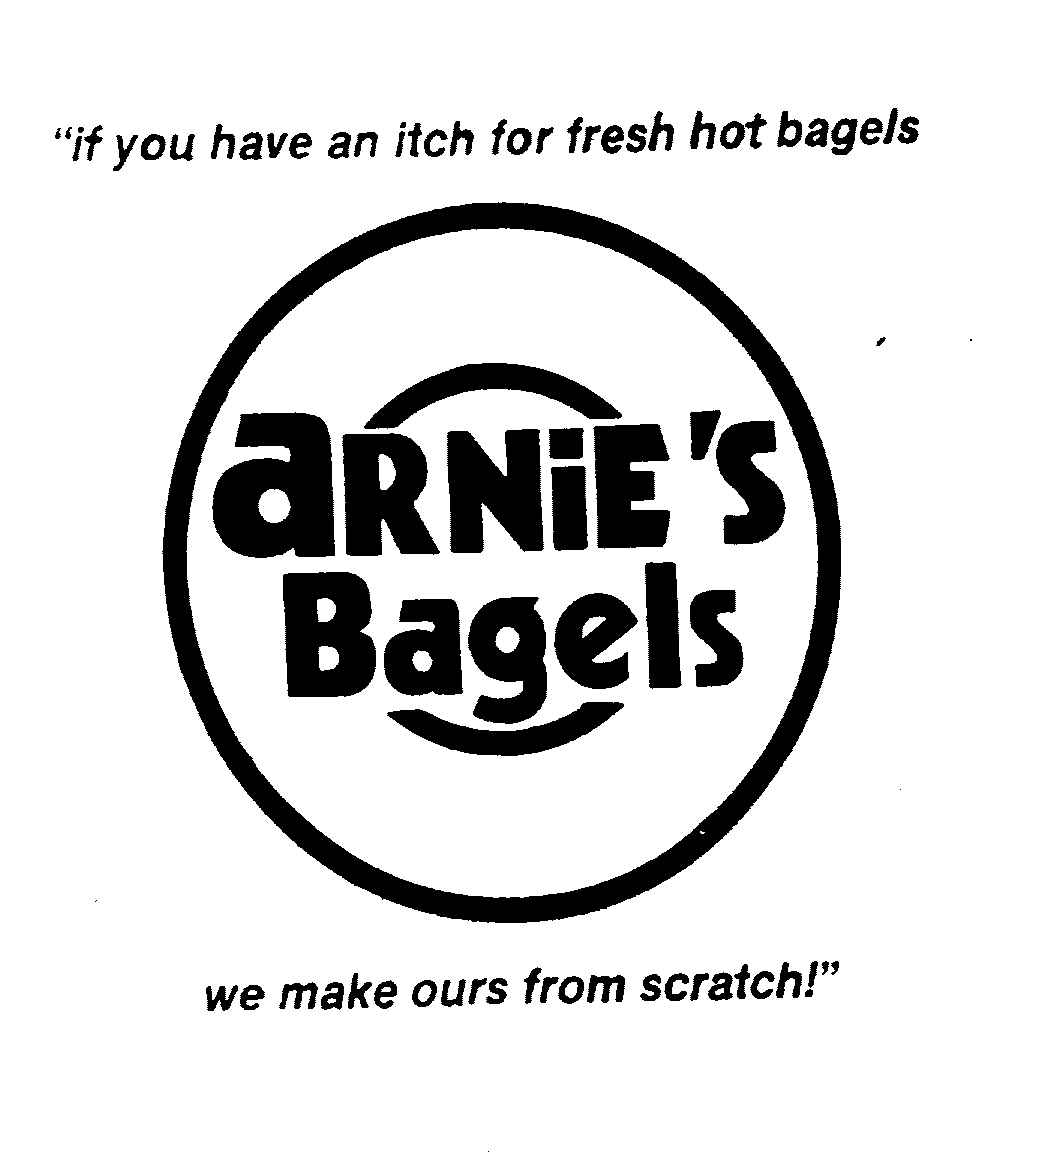  "IF YOU HAVE AN ITCH FOR FRESH HOT BAGELS WE MAKE OURS FROM SCRATCH!" ARNIE'S BAGELS